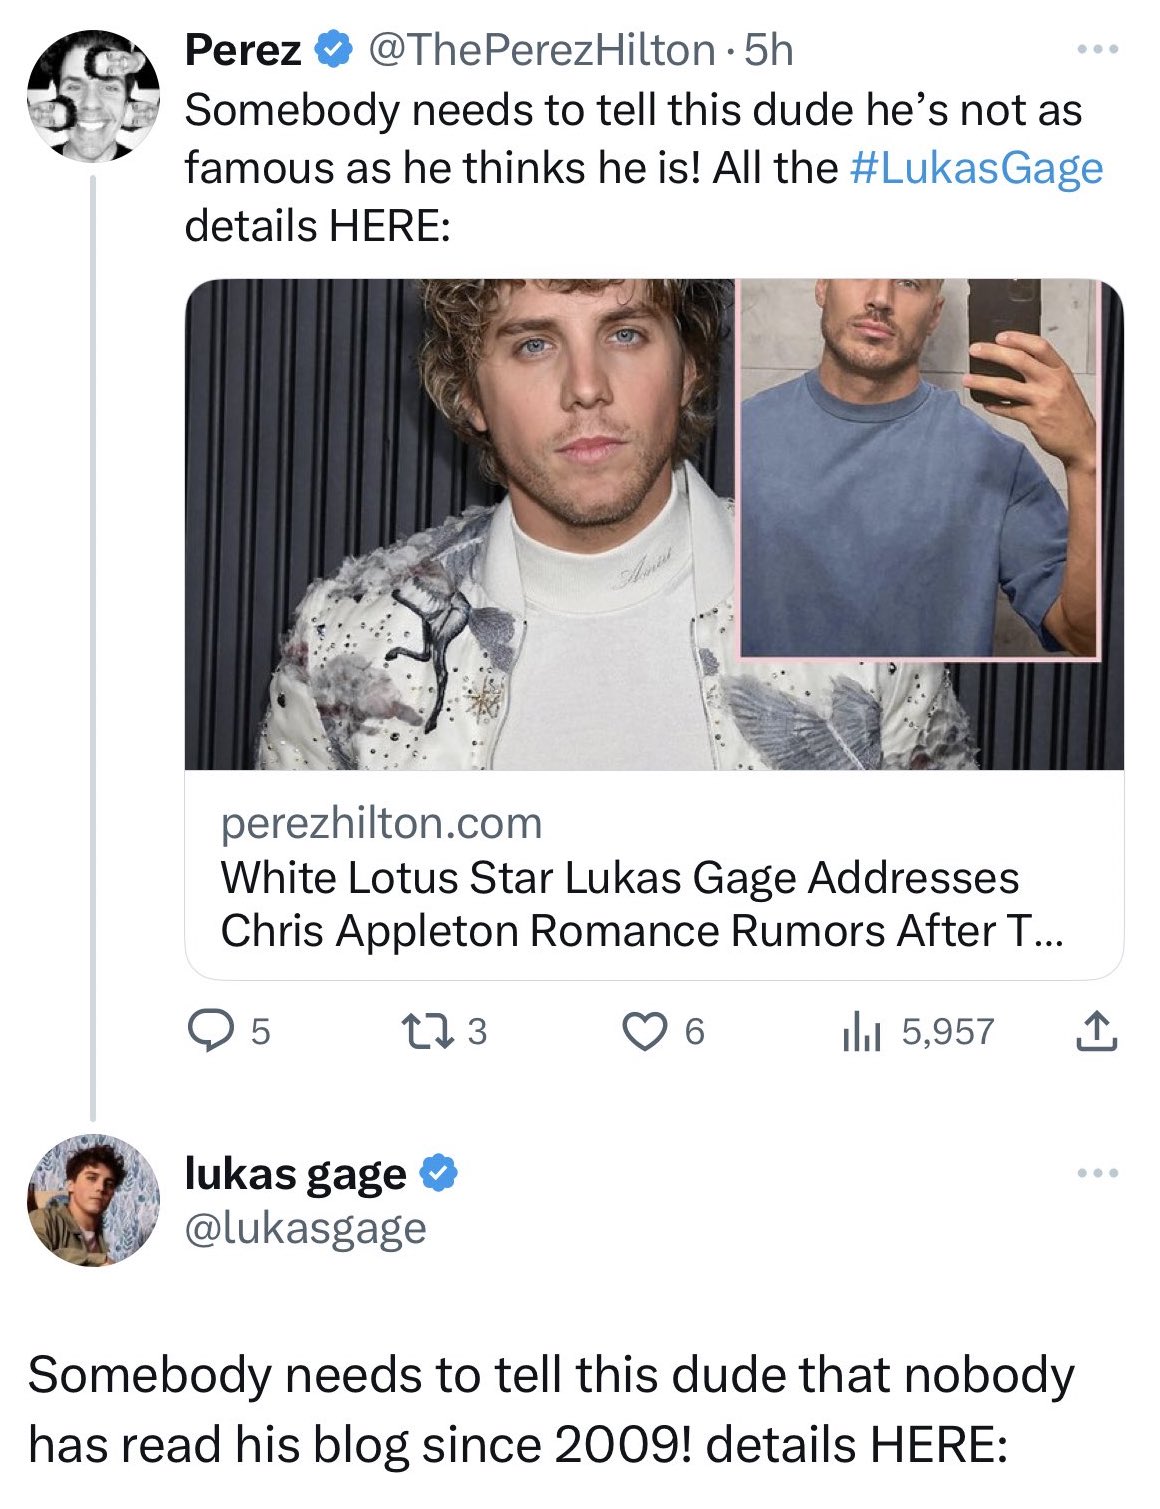 media - Perez Hilton 5h . Somebody needs to tell this dude he's not as famous as he thinks he is! All the details Here perezhilton.com White Lotus Star Lukas Gage Addresses Chris Appleton Romance Rumors After T... Q5 13 il 5,957 lukas gage 6 Somebody need